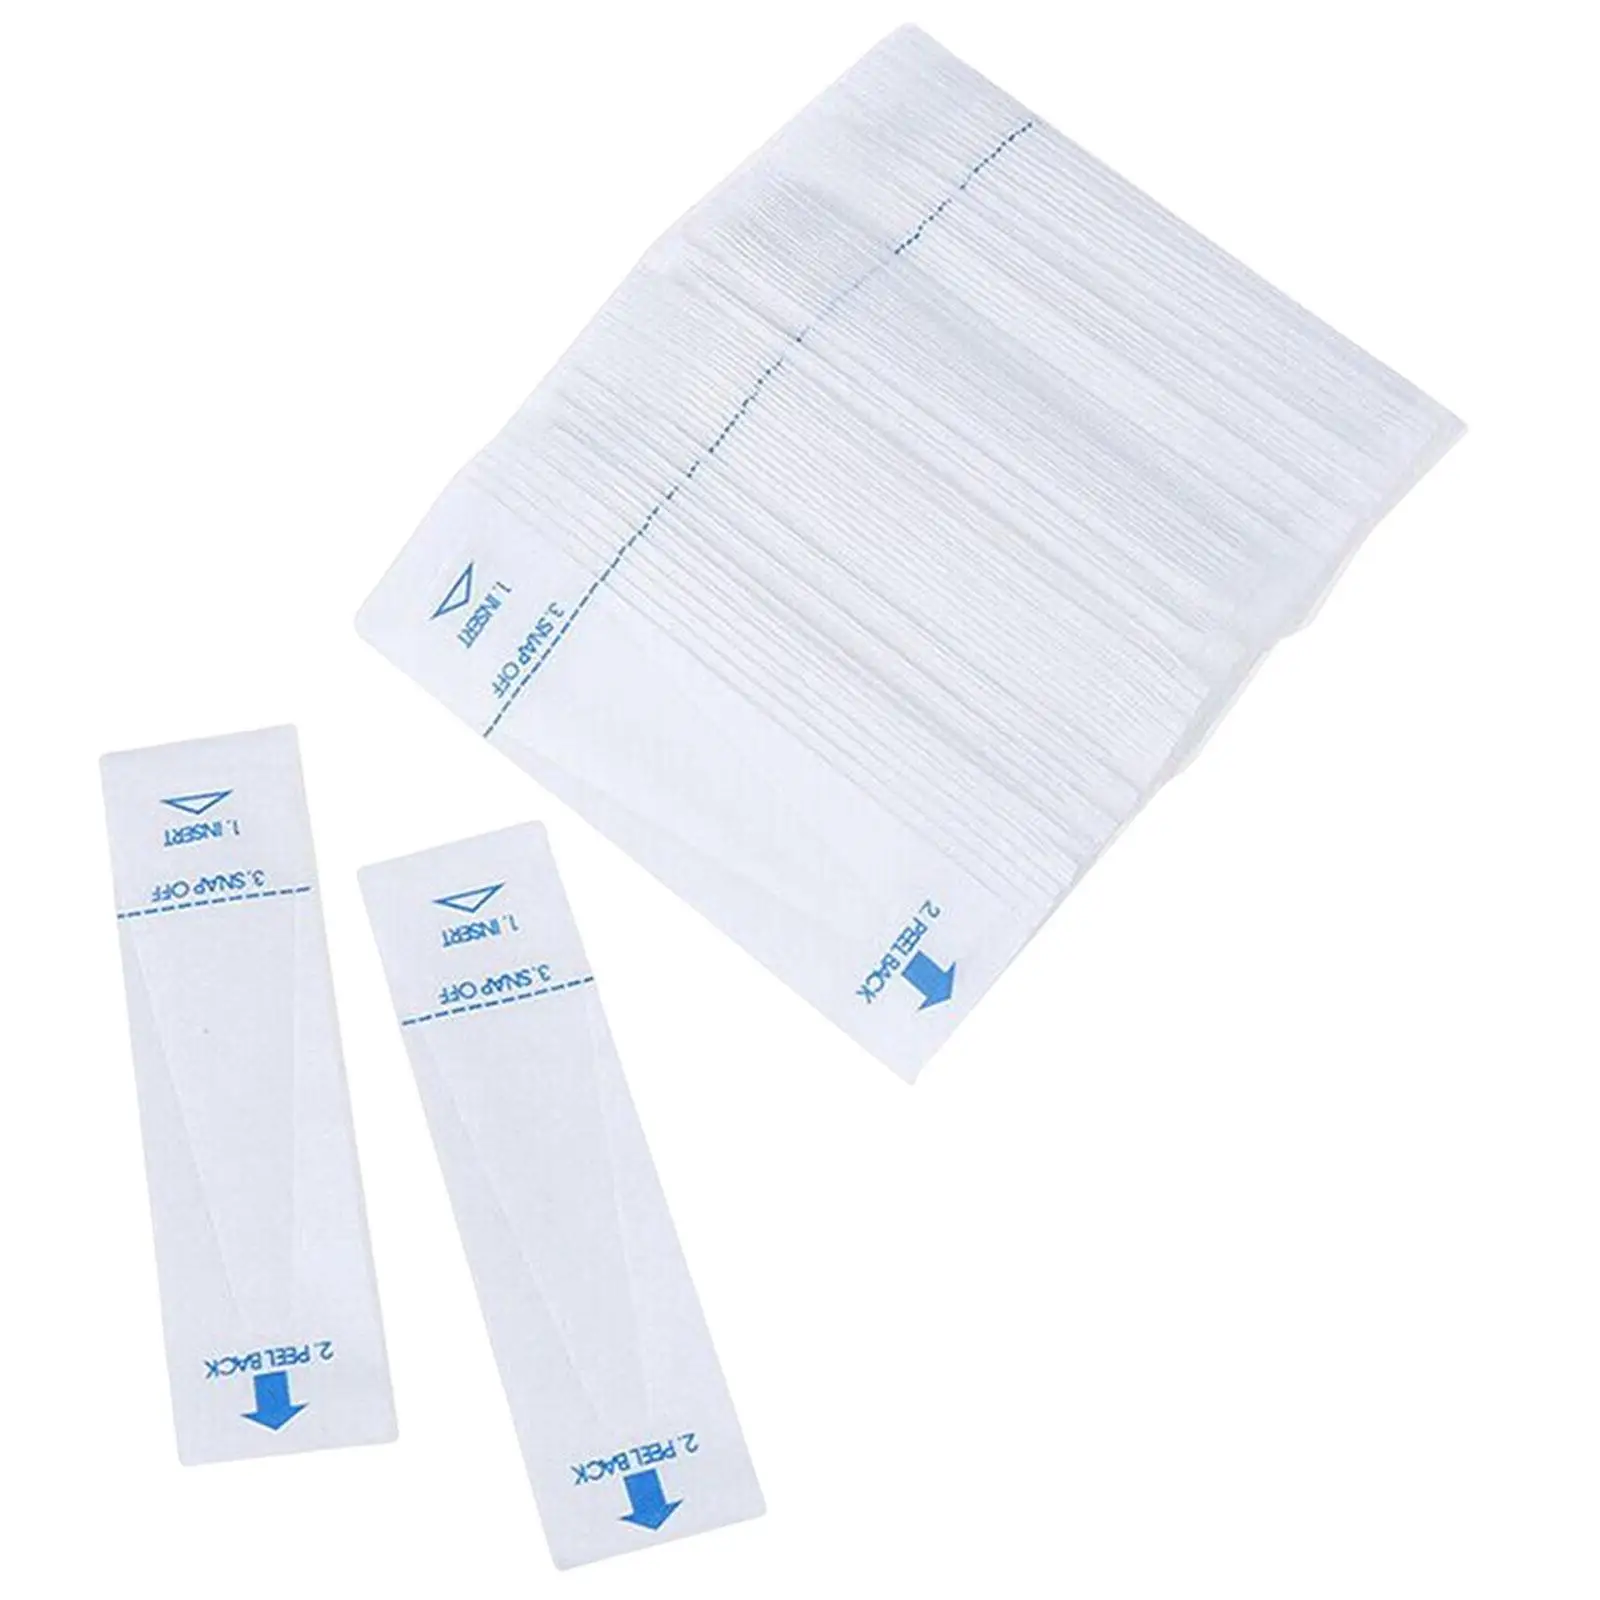 100 Pieces Disposable Probe Covers for Digital Thermometer Protective Universal Electronic Thermometer Sleeve for Family Members